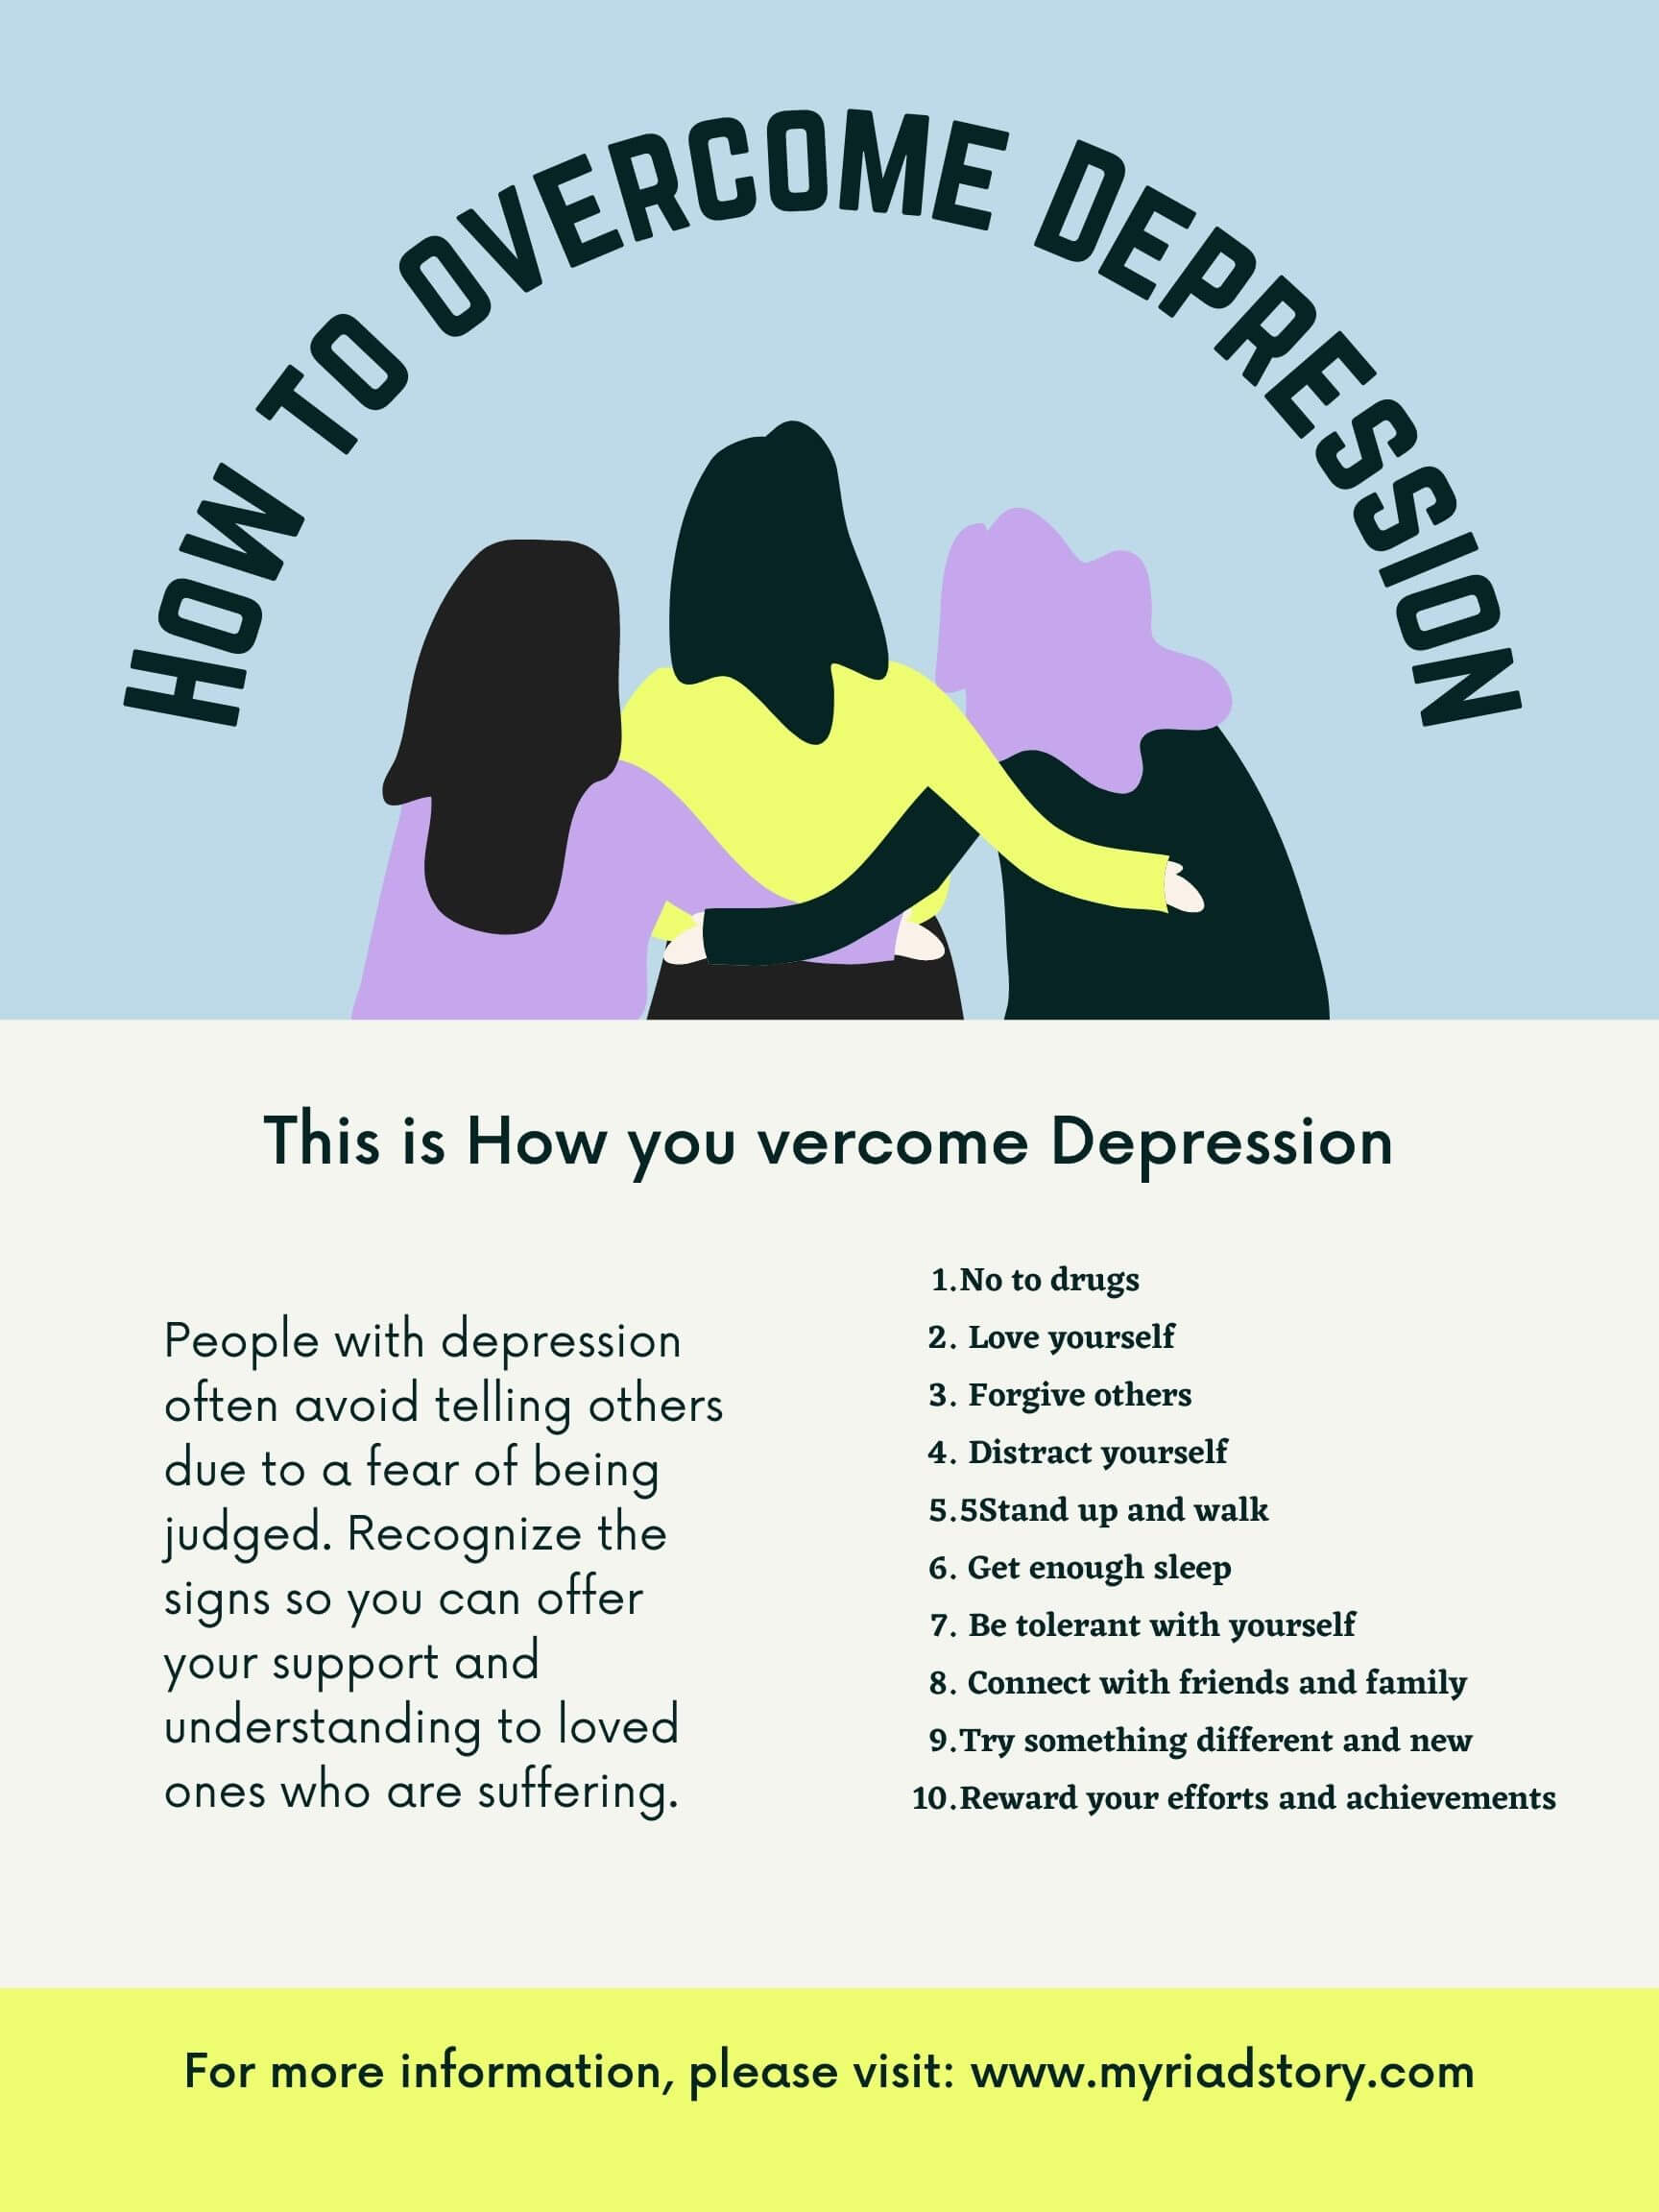 How to overcome depression